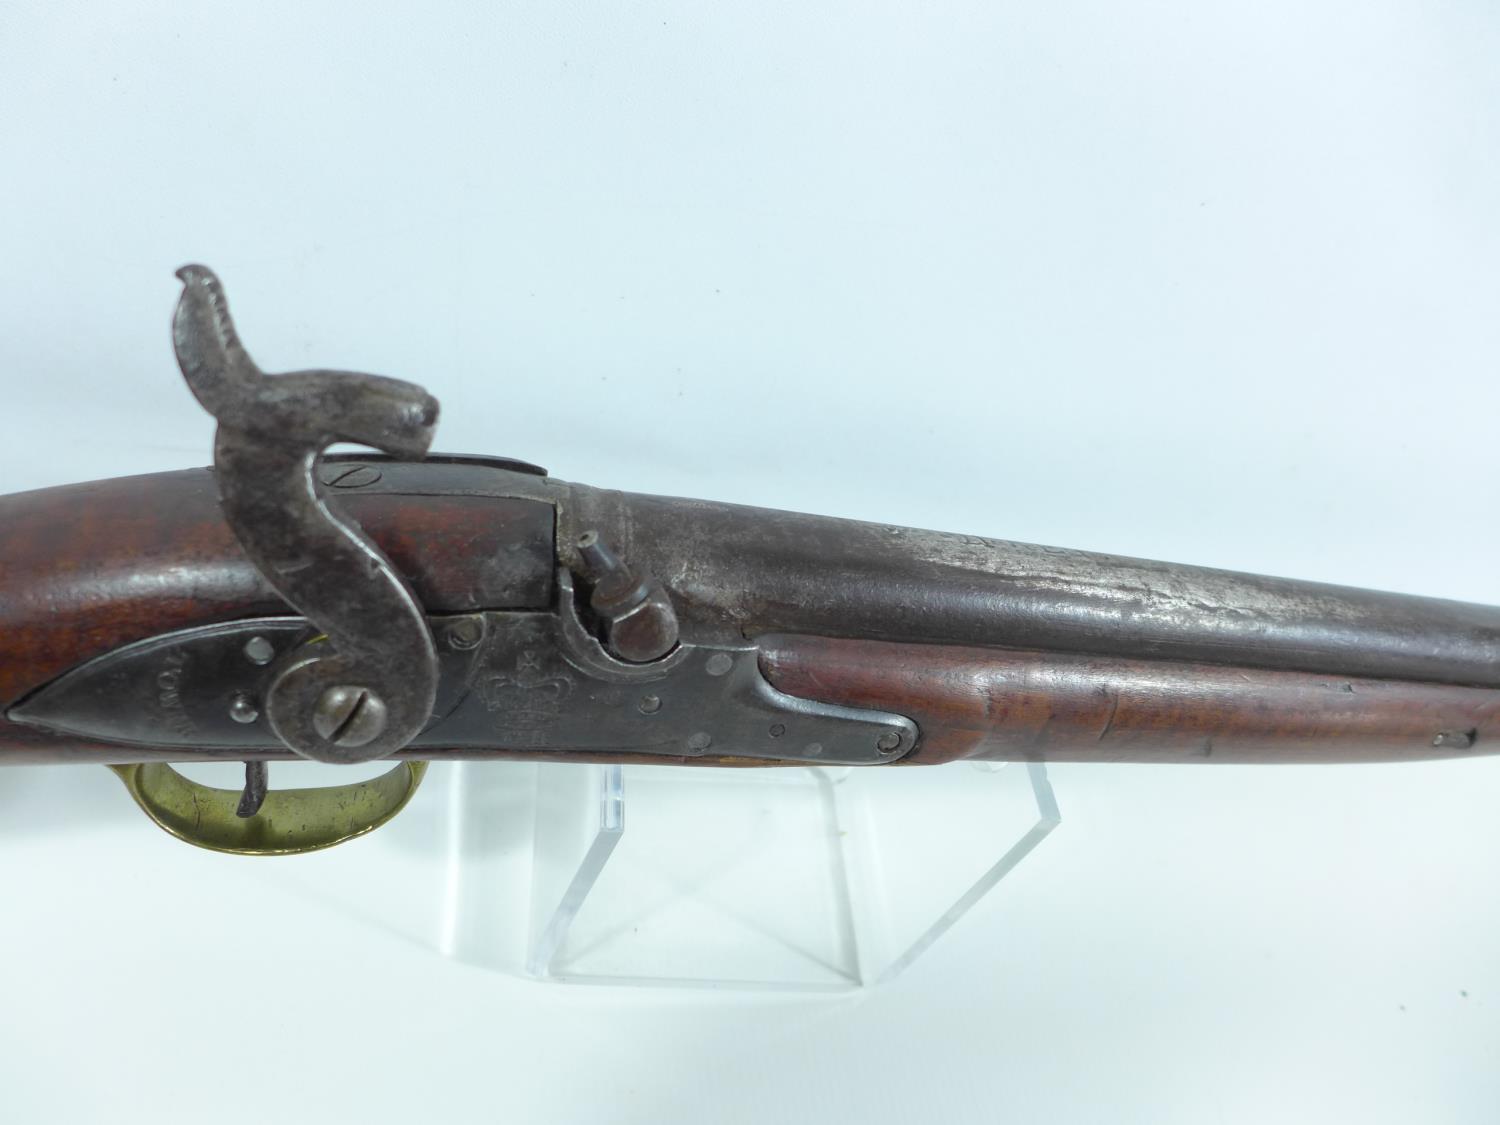 A PERCUSSION CAP 19TH CENTURY SMOOTH BORE MUSKET, CONVERTED FROM FLINTLOCK, 82CM BARREL, LOCK MARKED - Image 3 of 8